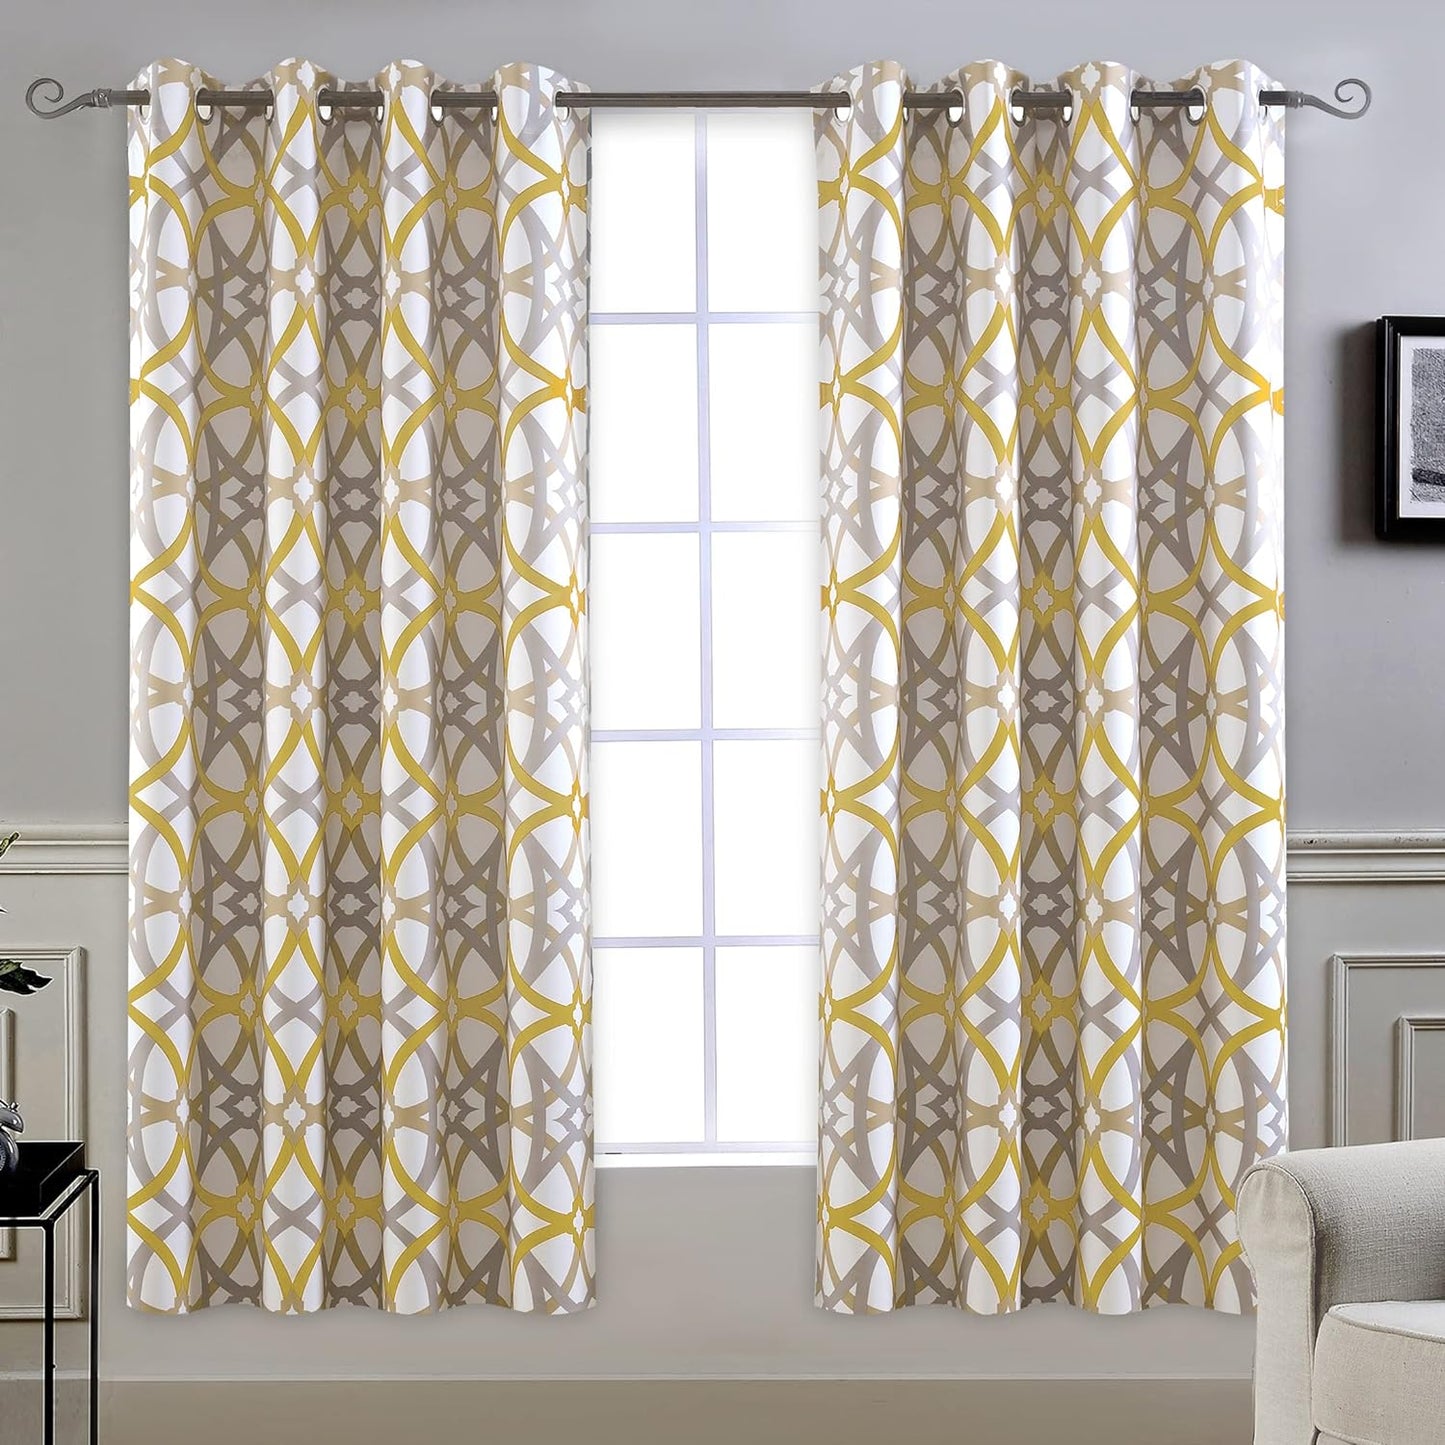 Driftaway Alexander Thermal Blackout Grommet Unlined Window Curtains Spiral Geo Trellis Pattern Set of 2 Panels Each Size 52 Inch by 84 Inch Red and Gray  DriftAway Golden Yellow/Gray 52"X63" 